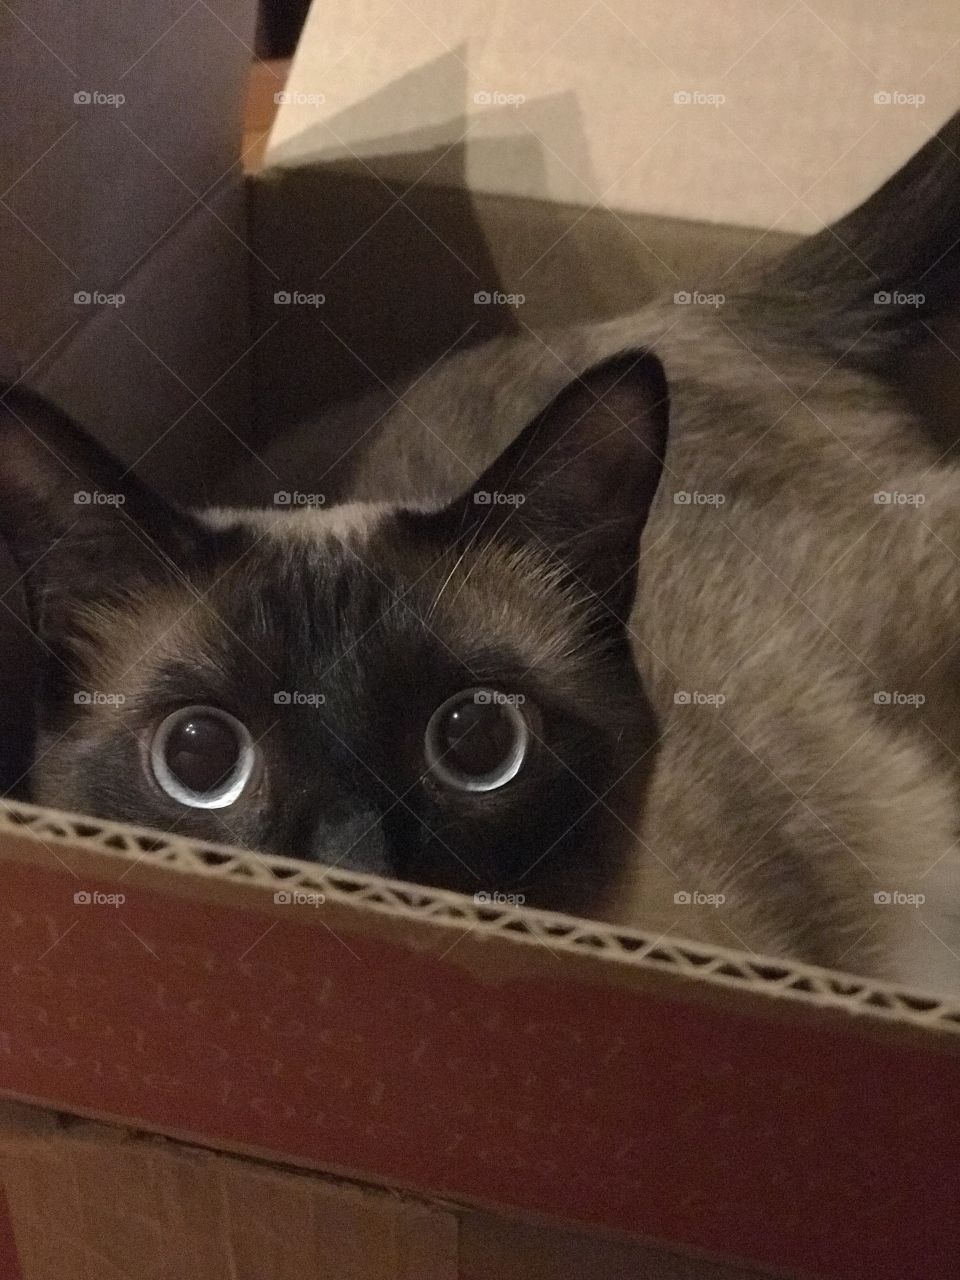 This is my box; USA Ragdoll/ Siamese Cat hiding in cardboard box, peeking over the edge with bright blue eyes. 